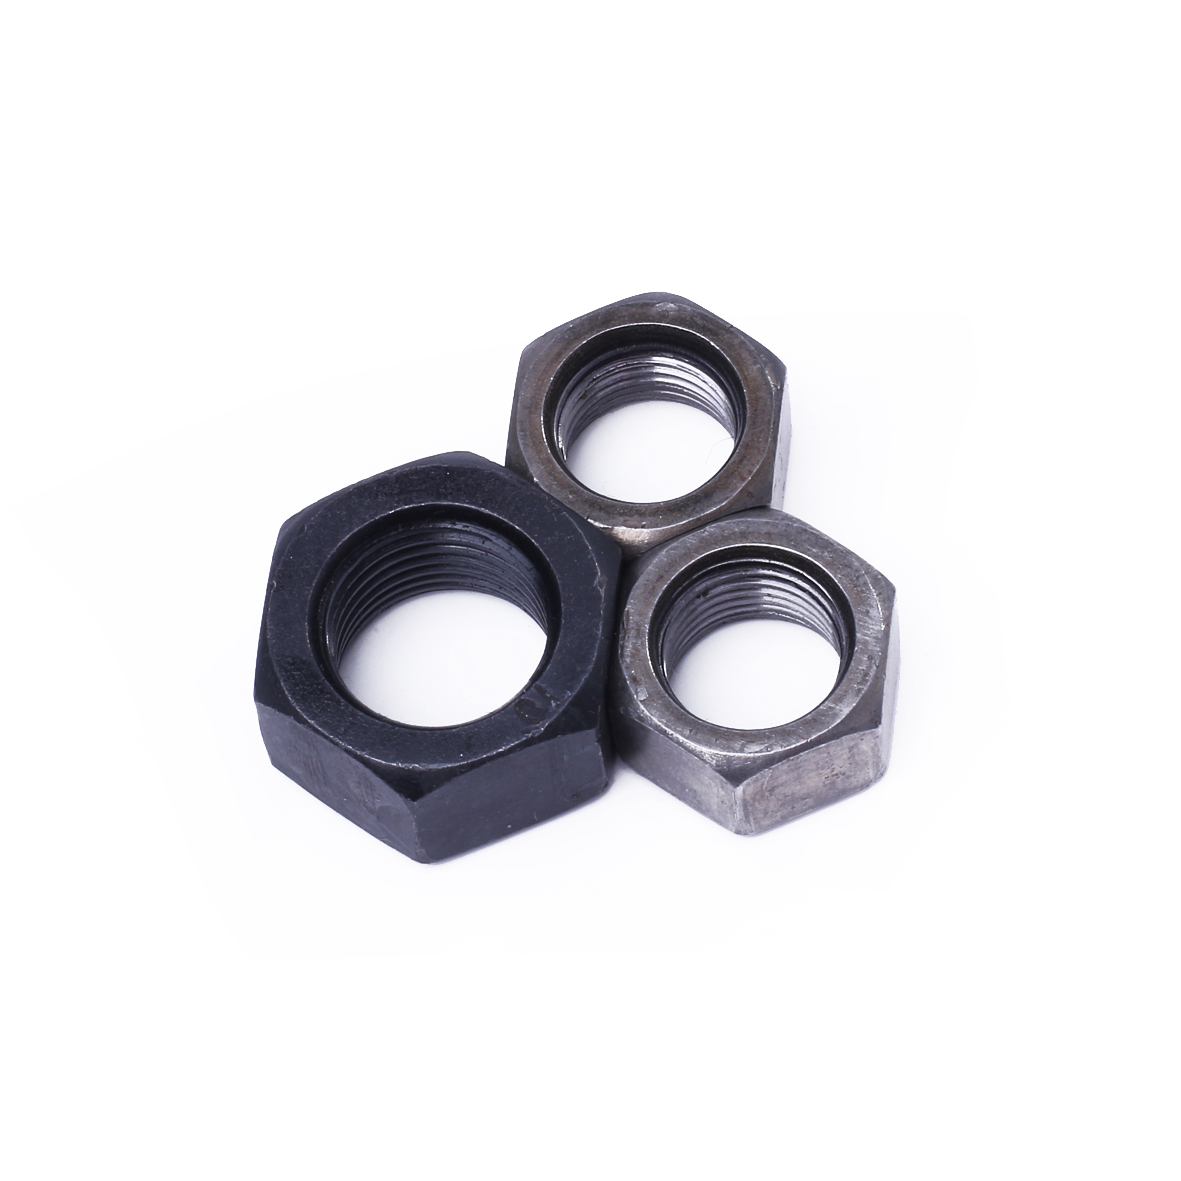 Hex nut Featured Image